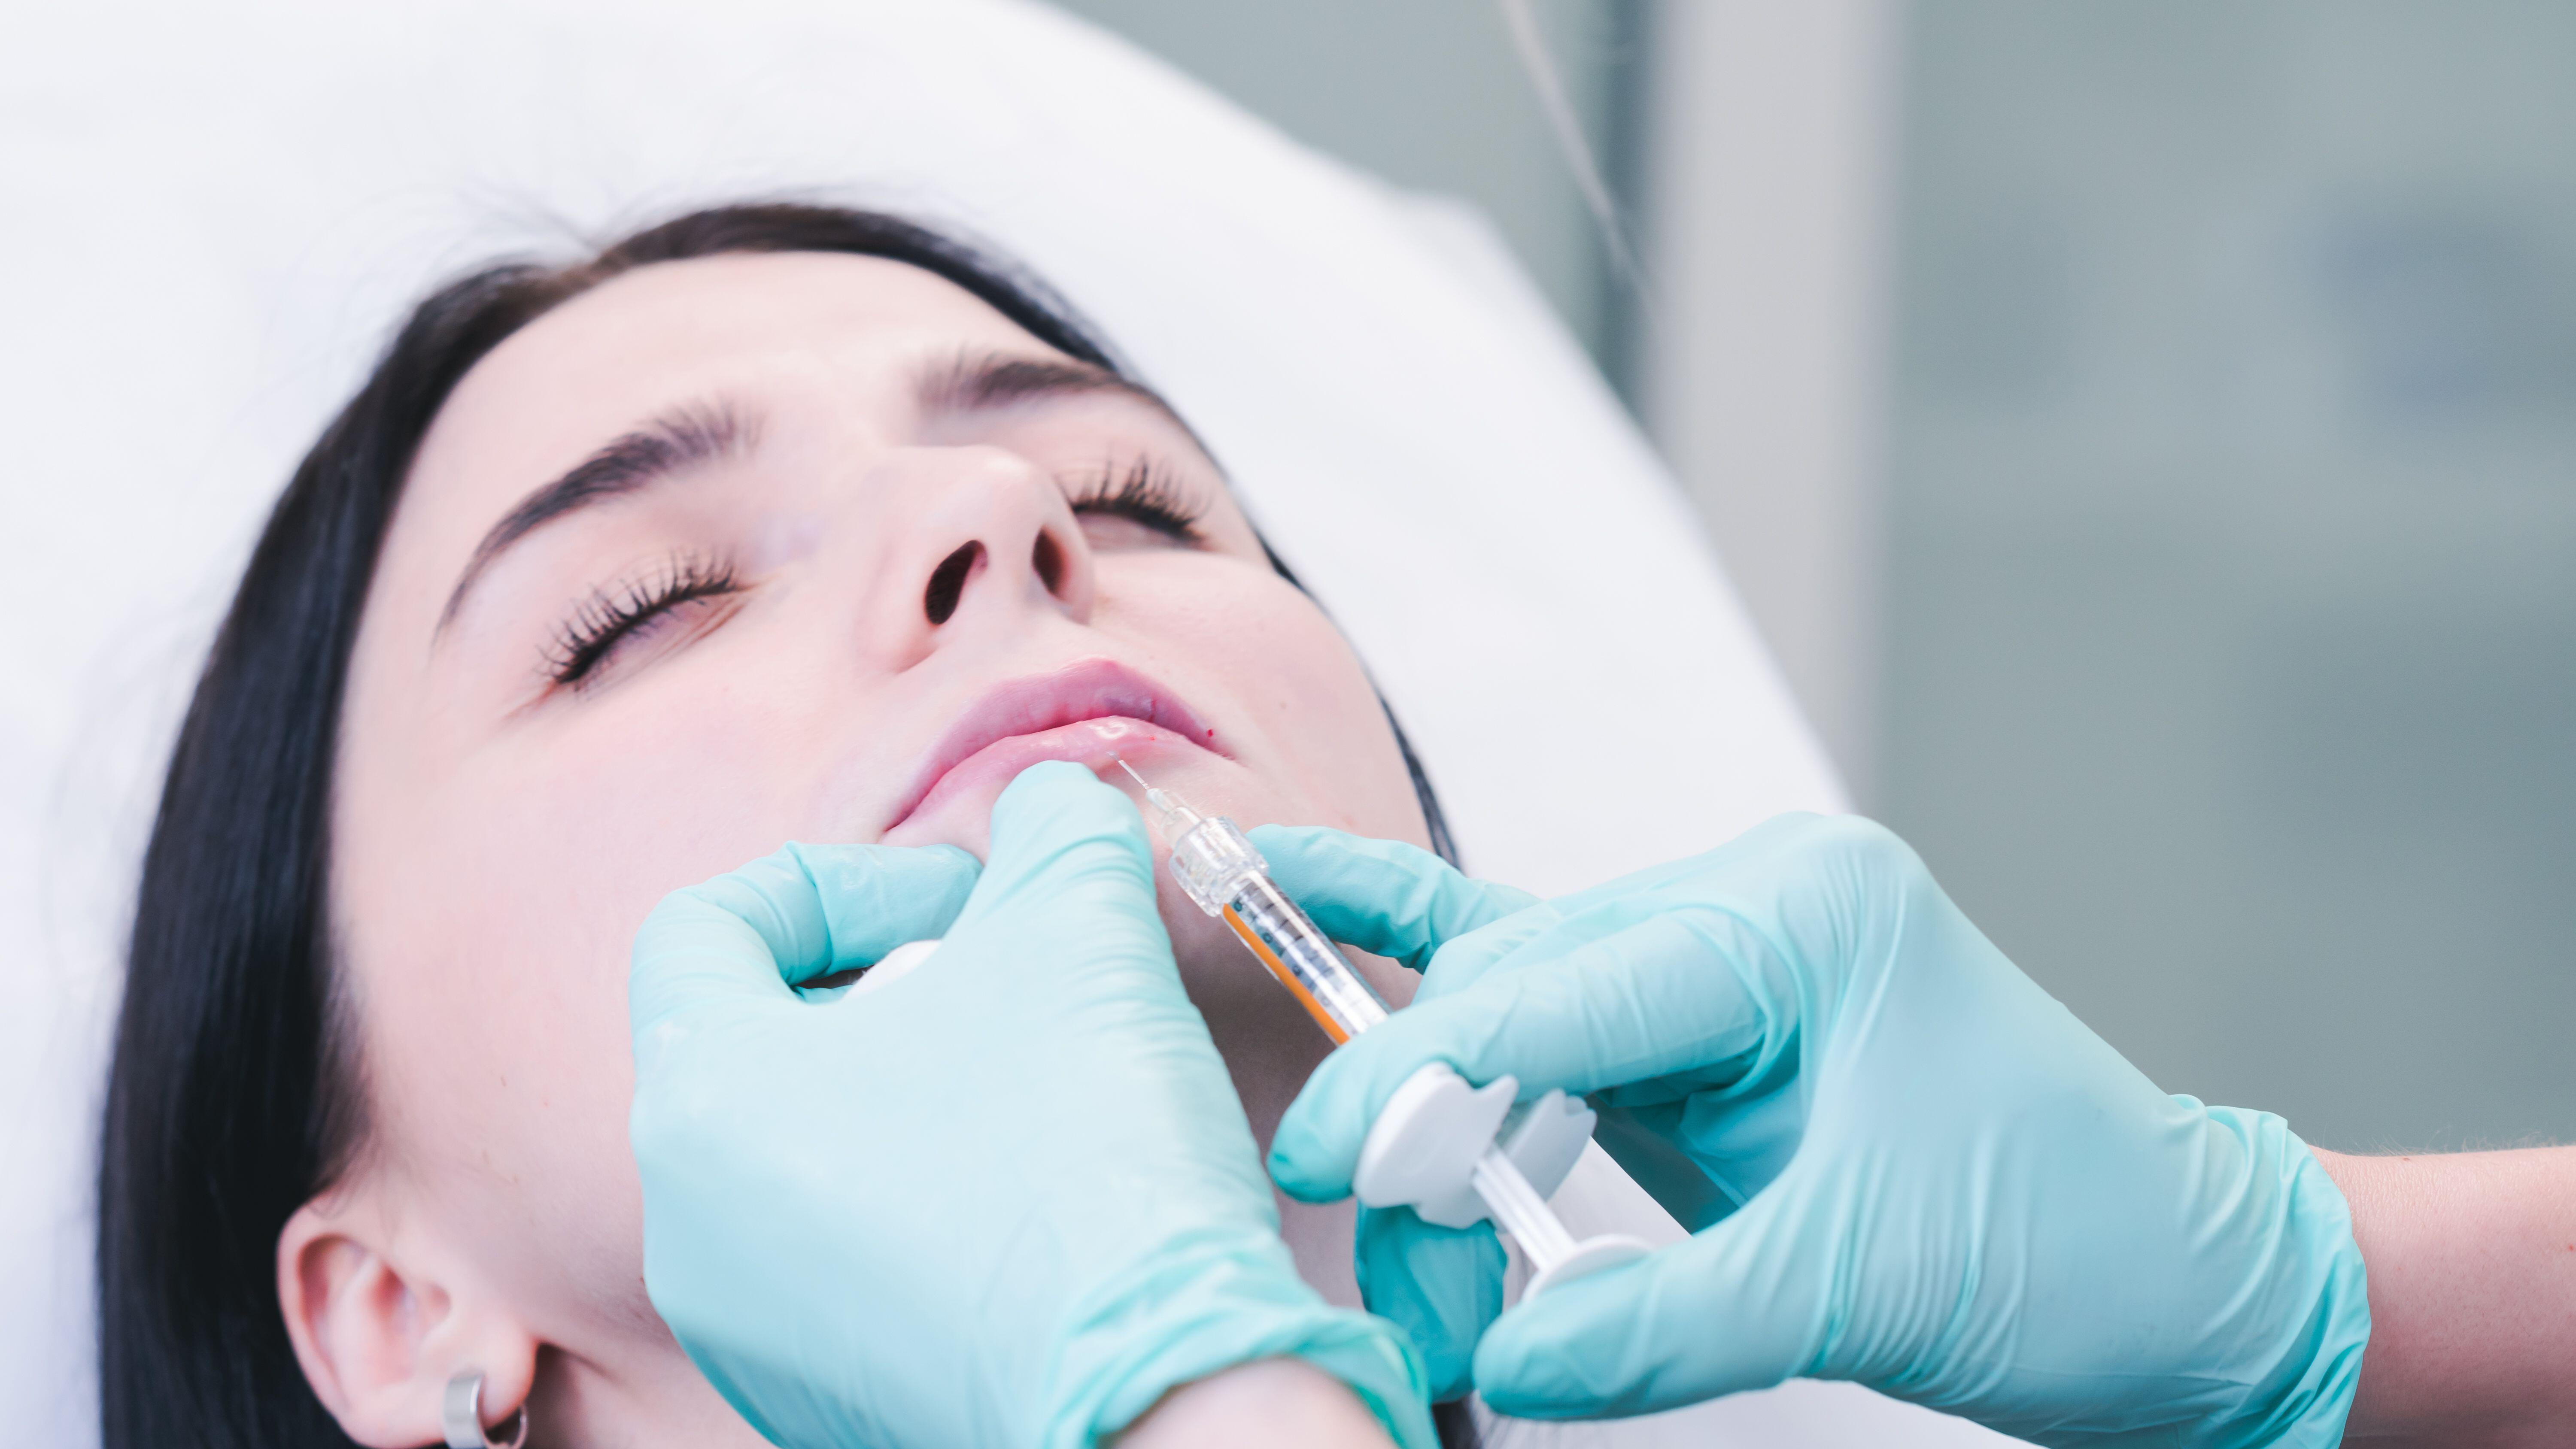 A botox injection in a woman’s lips